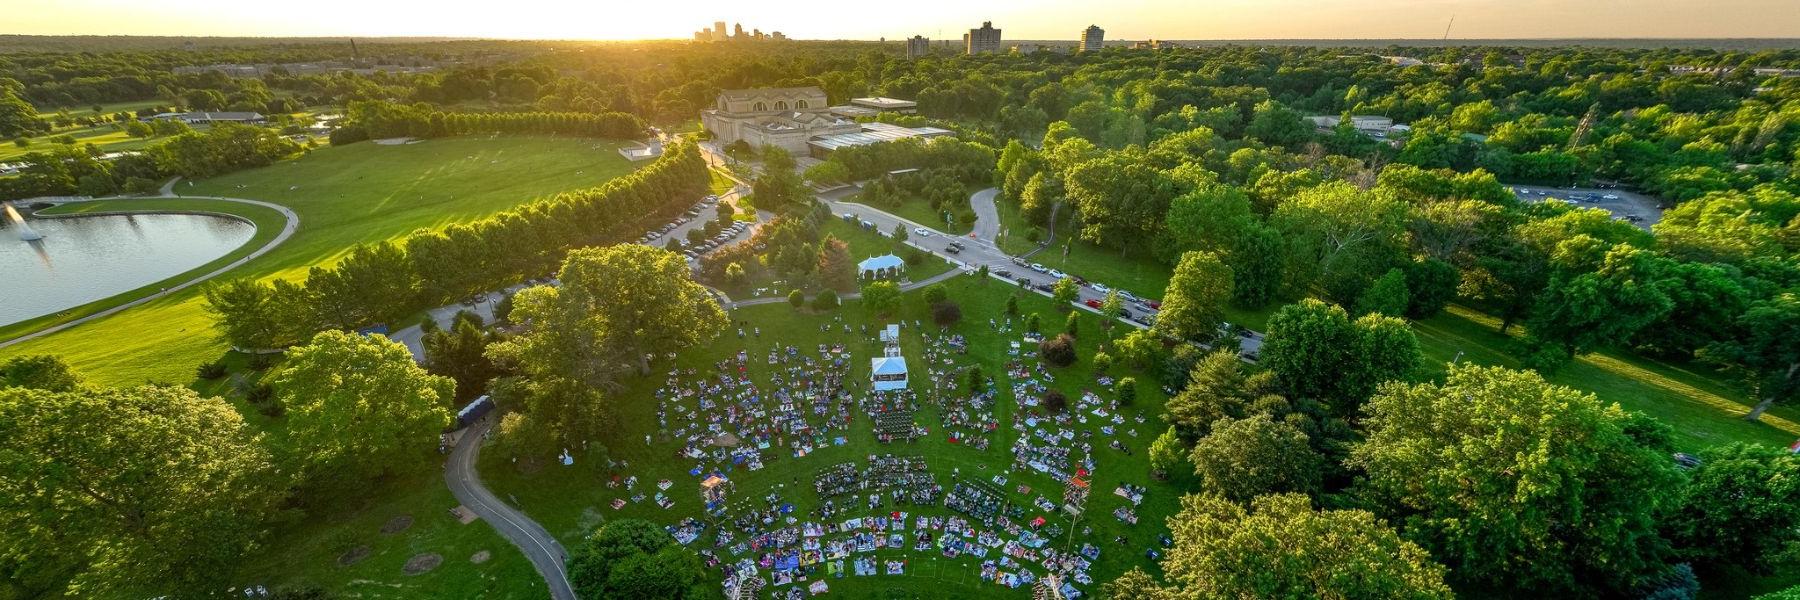 In St. Louis, Shakespeare in the Park is free and open to the public.